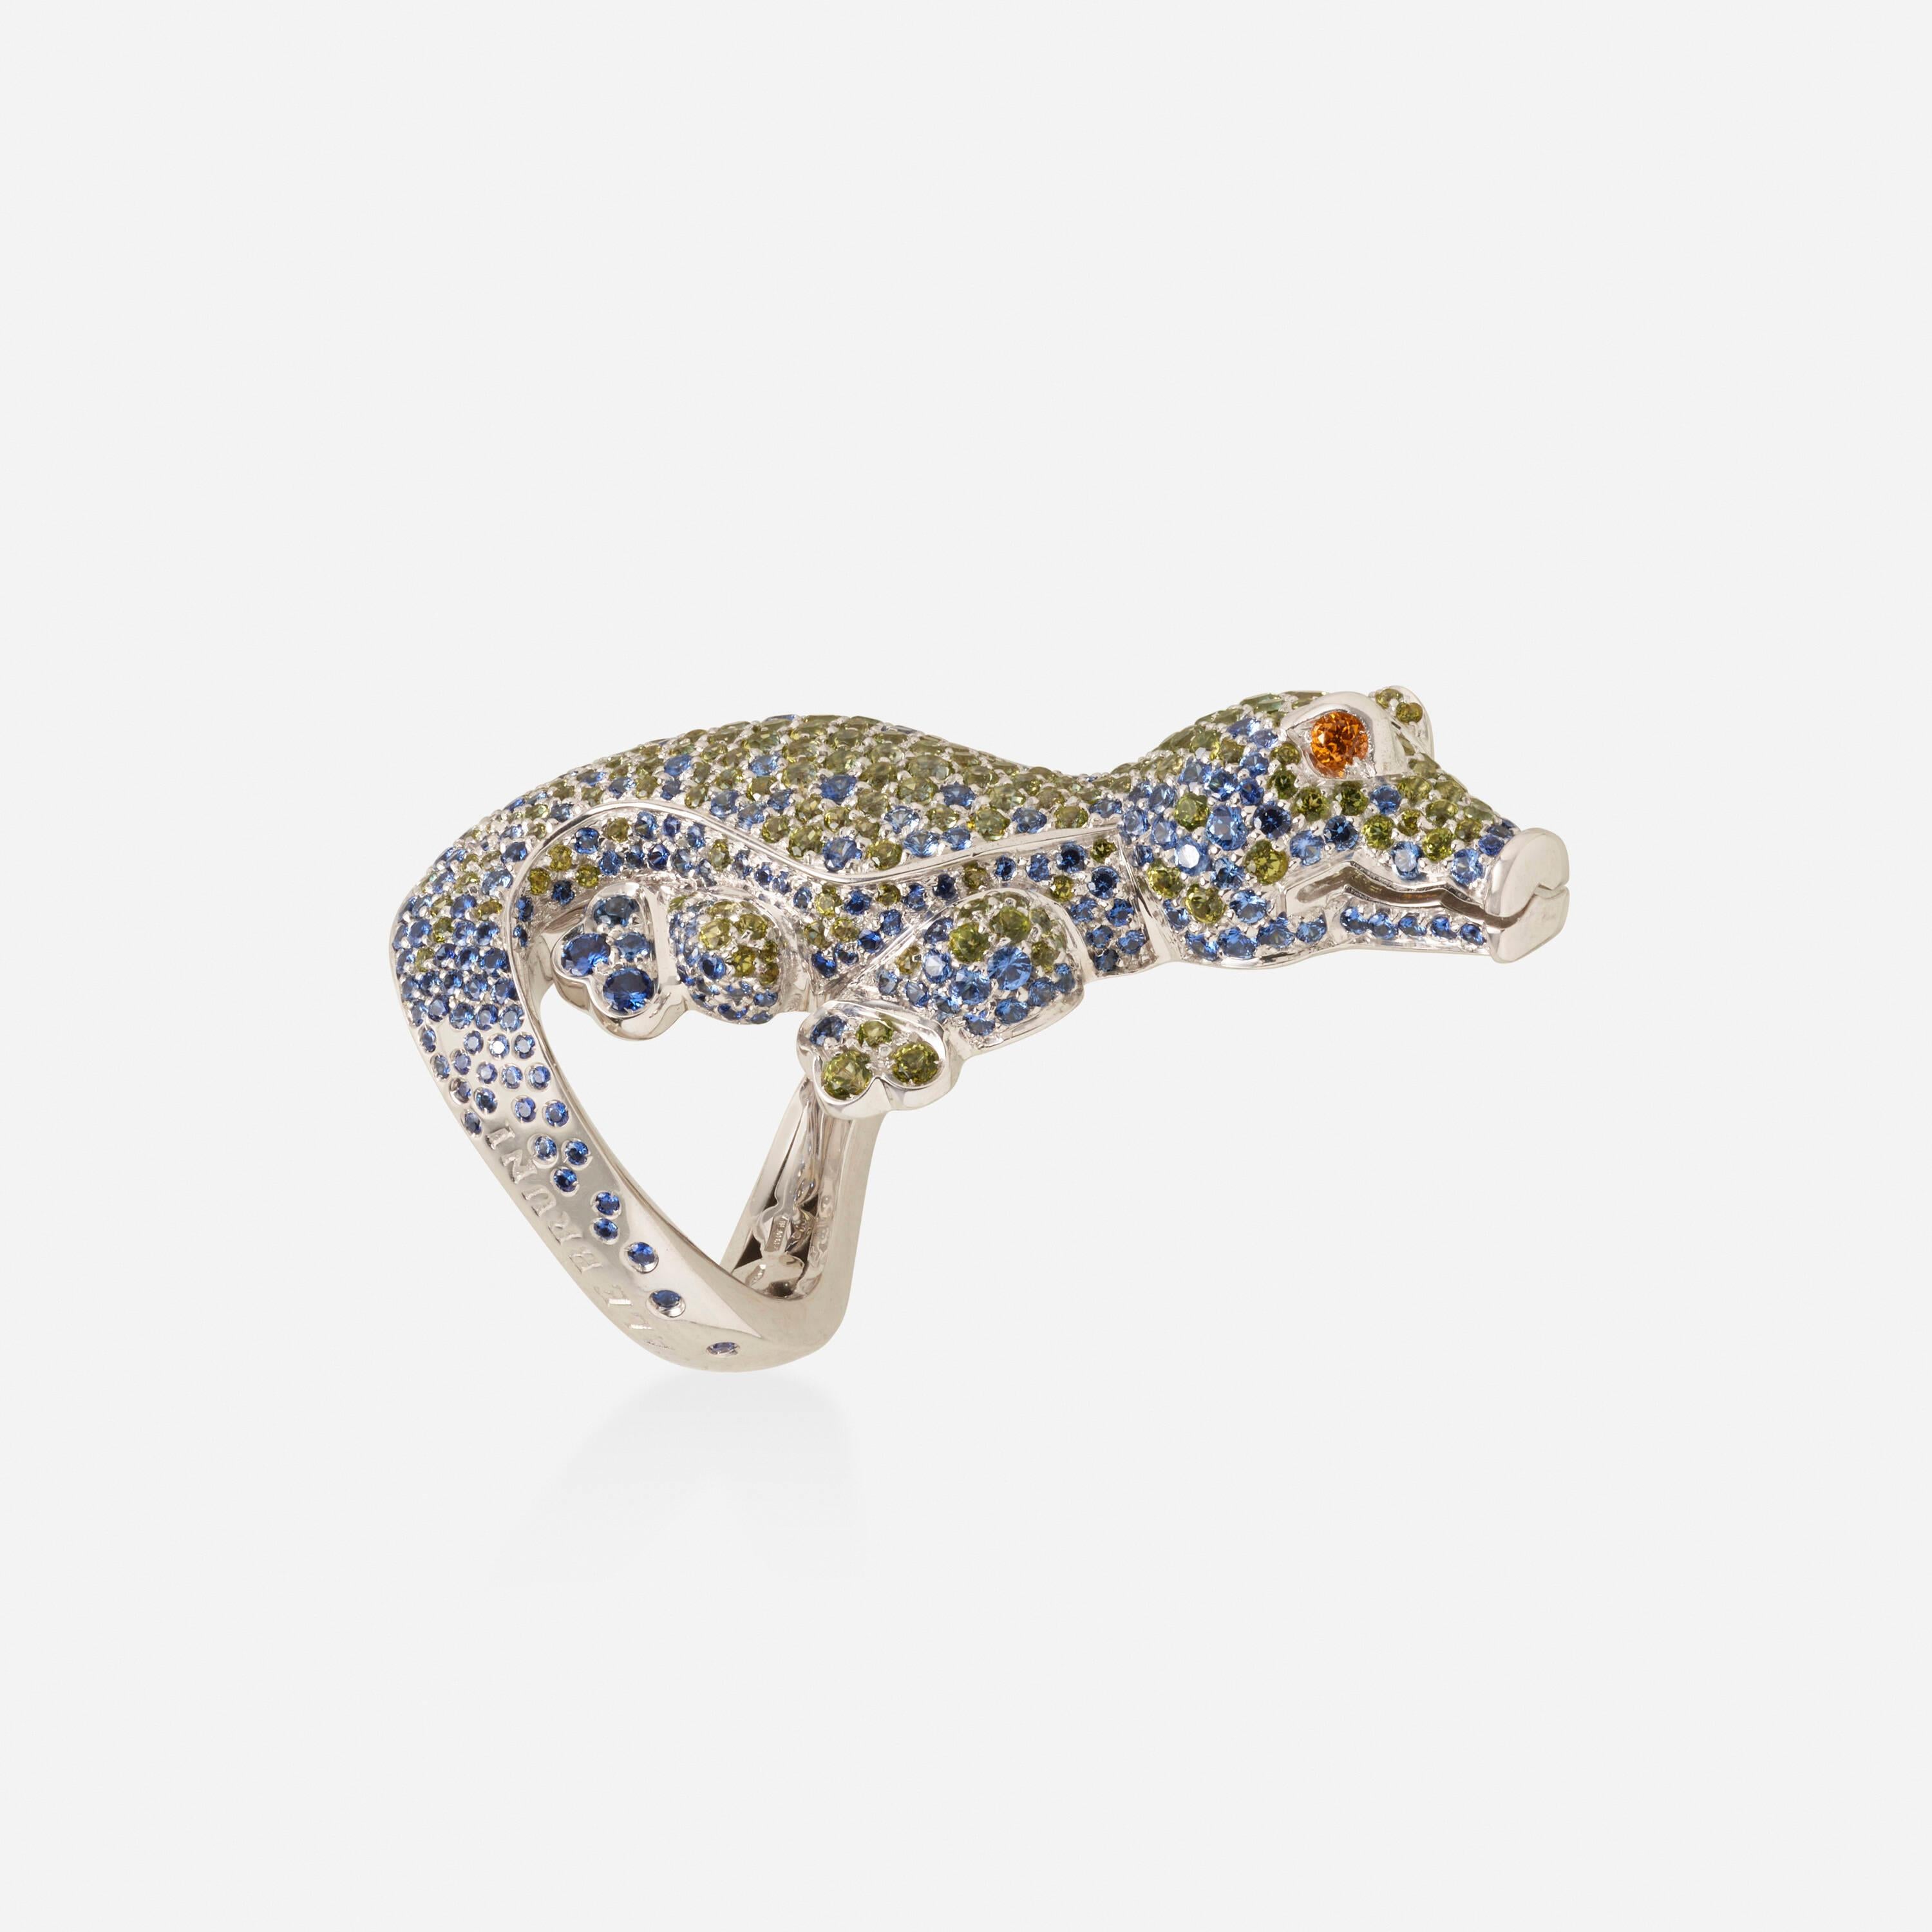 Pasquale Bruni 'Pensiero D’Africa' Sapphire Garnet and Topaz Crocodile Ring For Sale 1